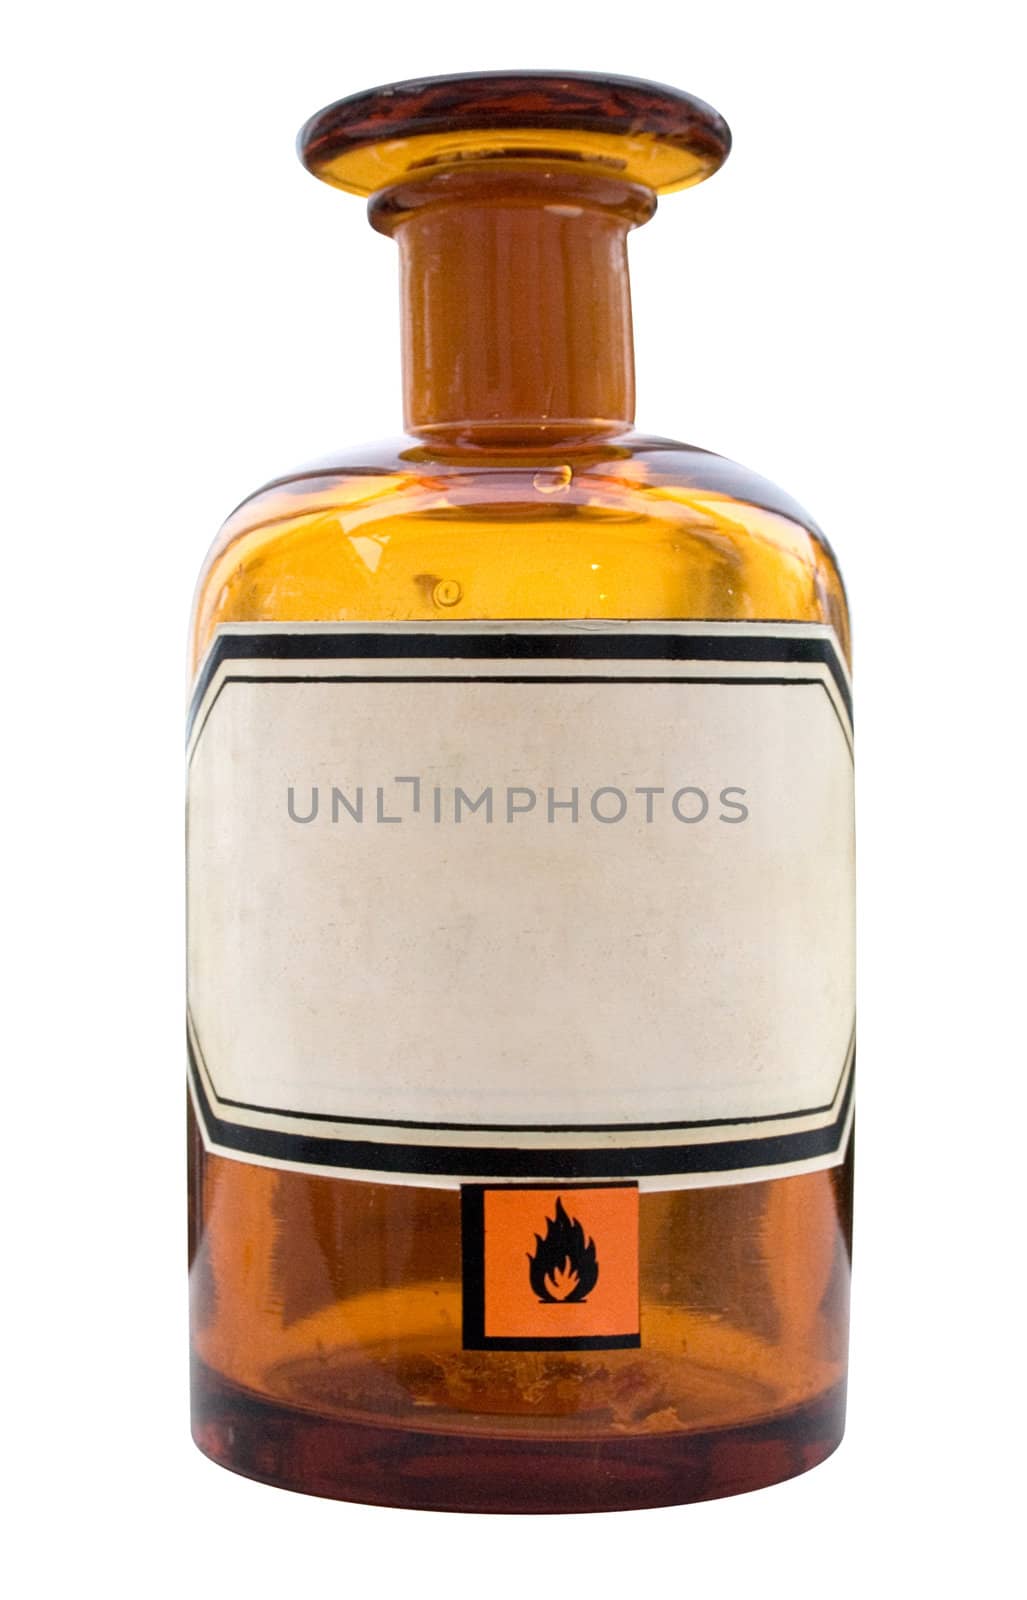 Brown medicine bottle with blank label isolated on a white background. File contains clipping path.